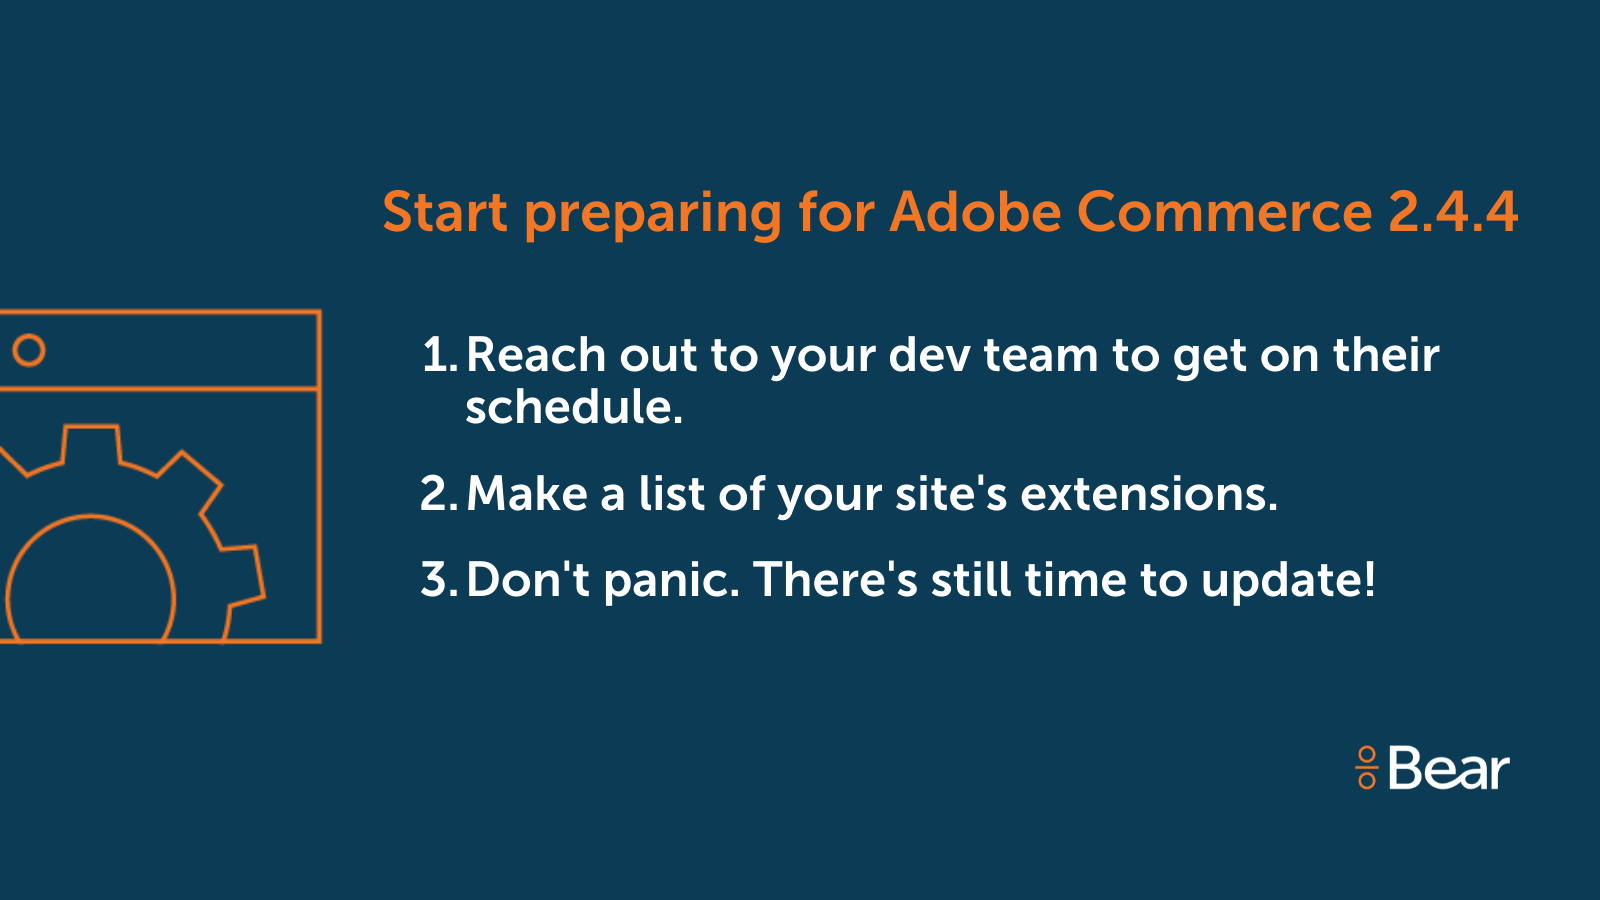 how to prepare for adobe commerce 2.4.4: reach out to a dev team, make a list of site extensions, and dont panic.